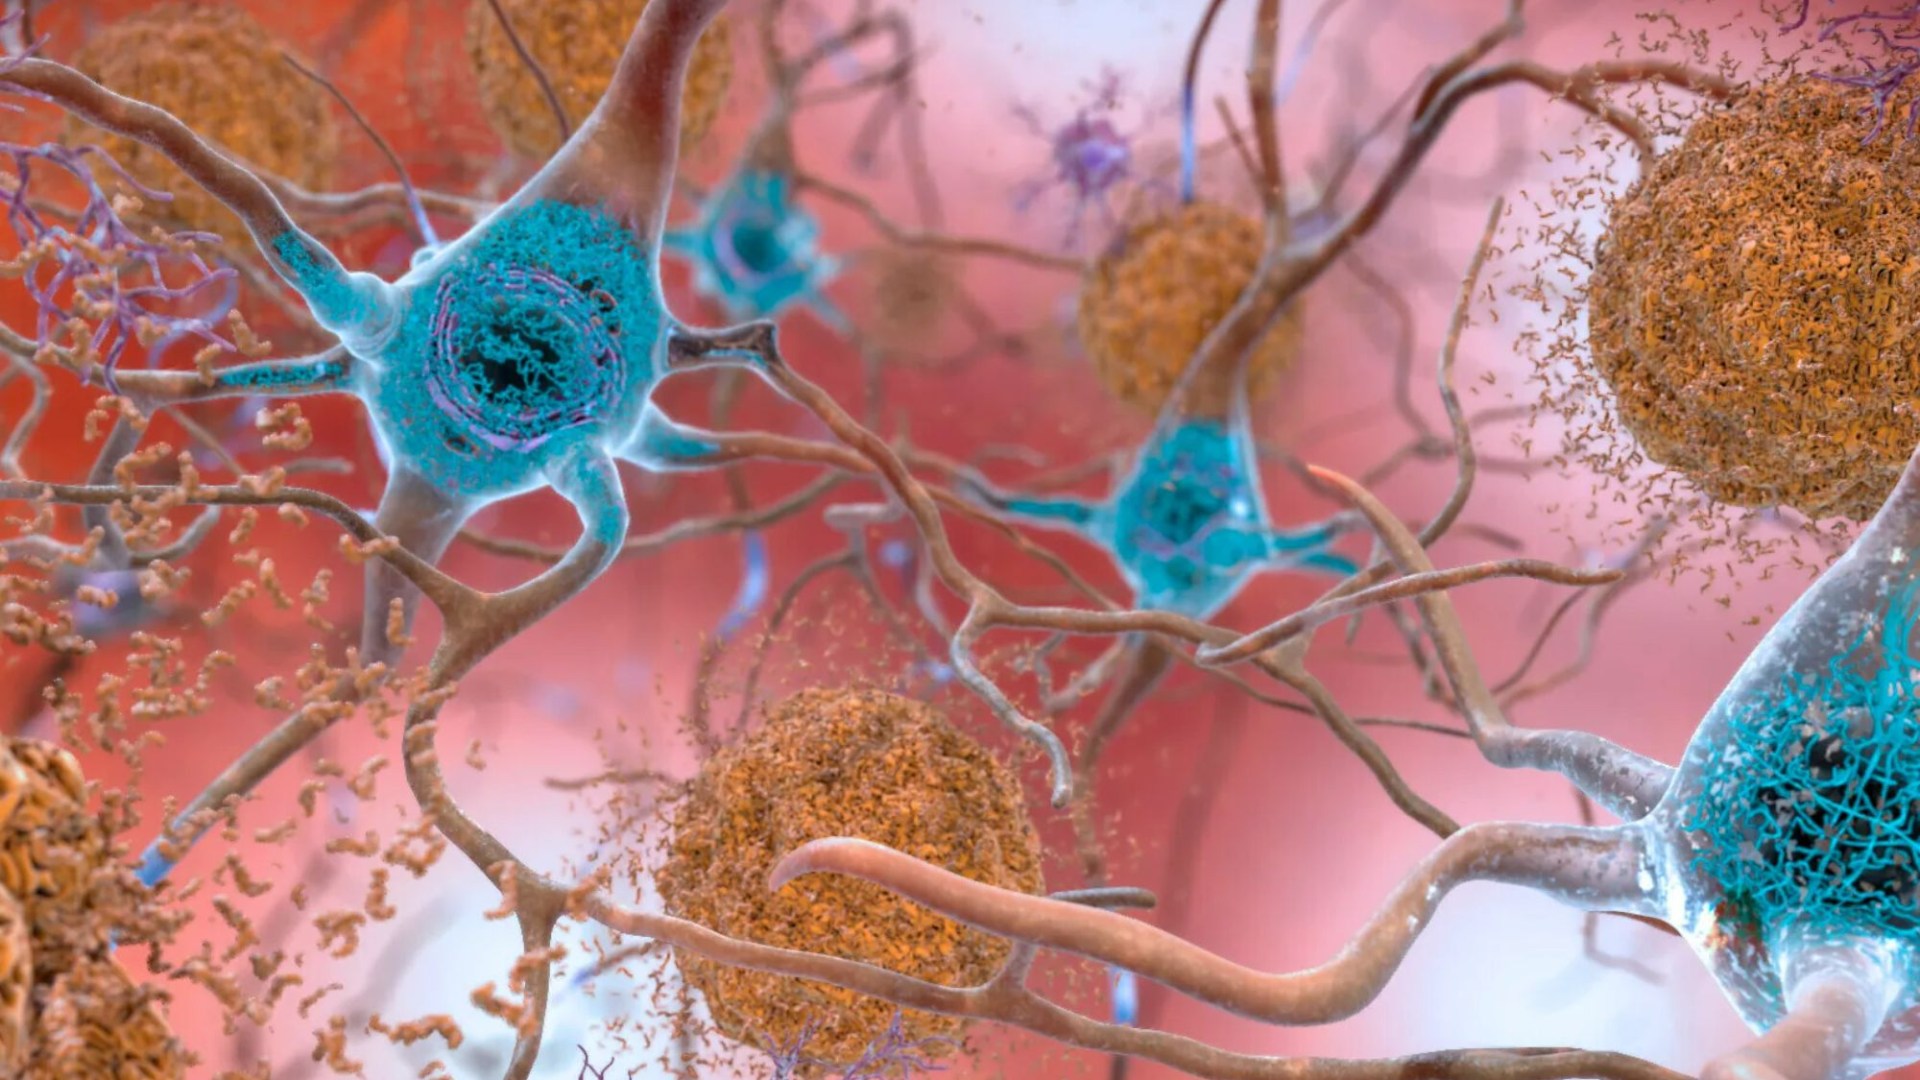 Scientists track brain cell death to find early warning signs of deadly Alzheirmer’s.